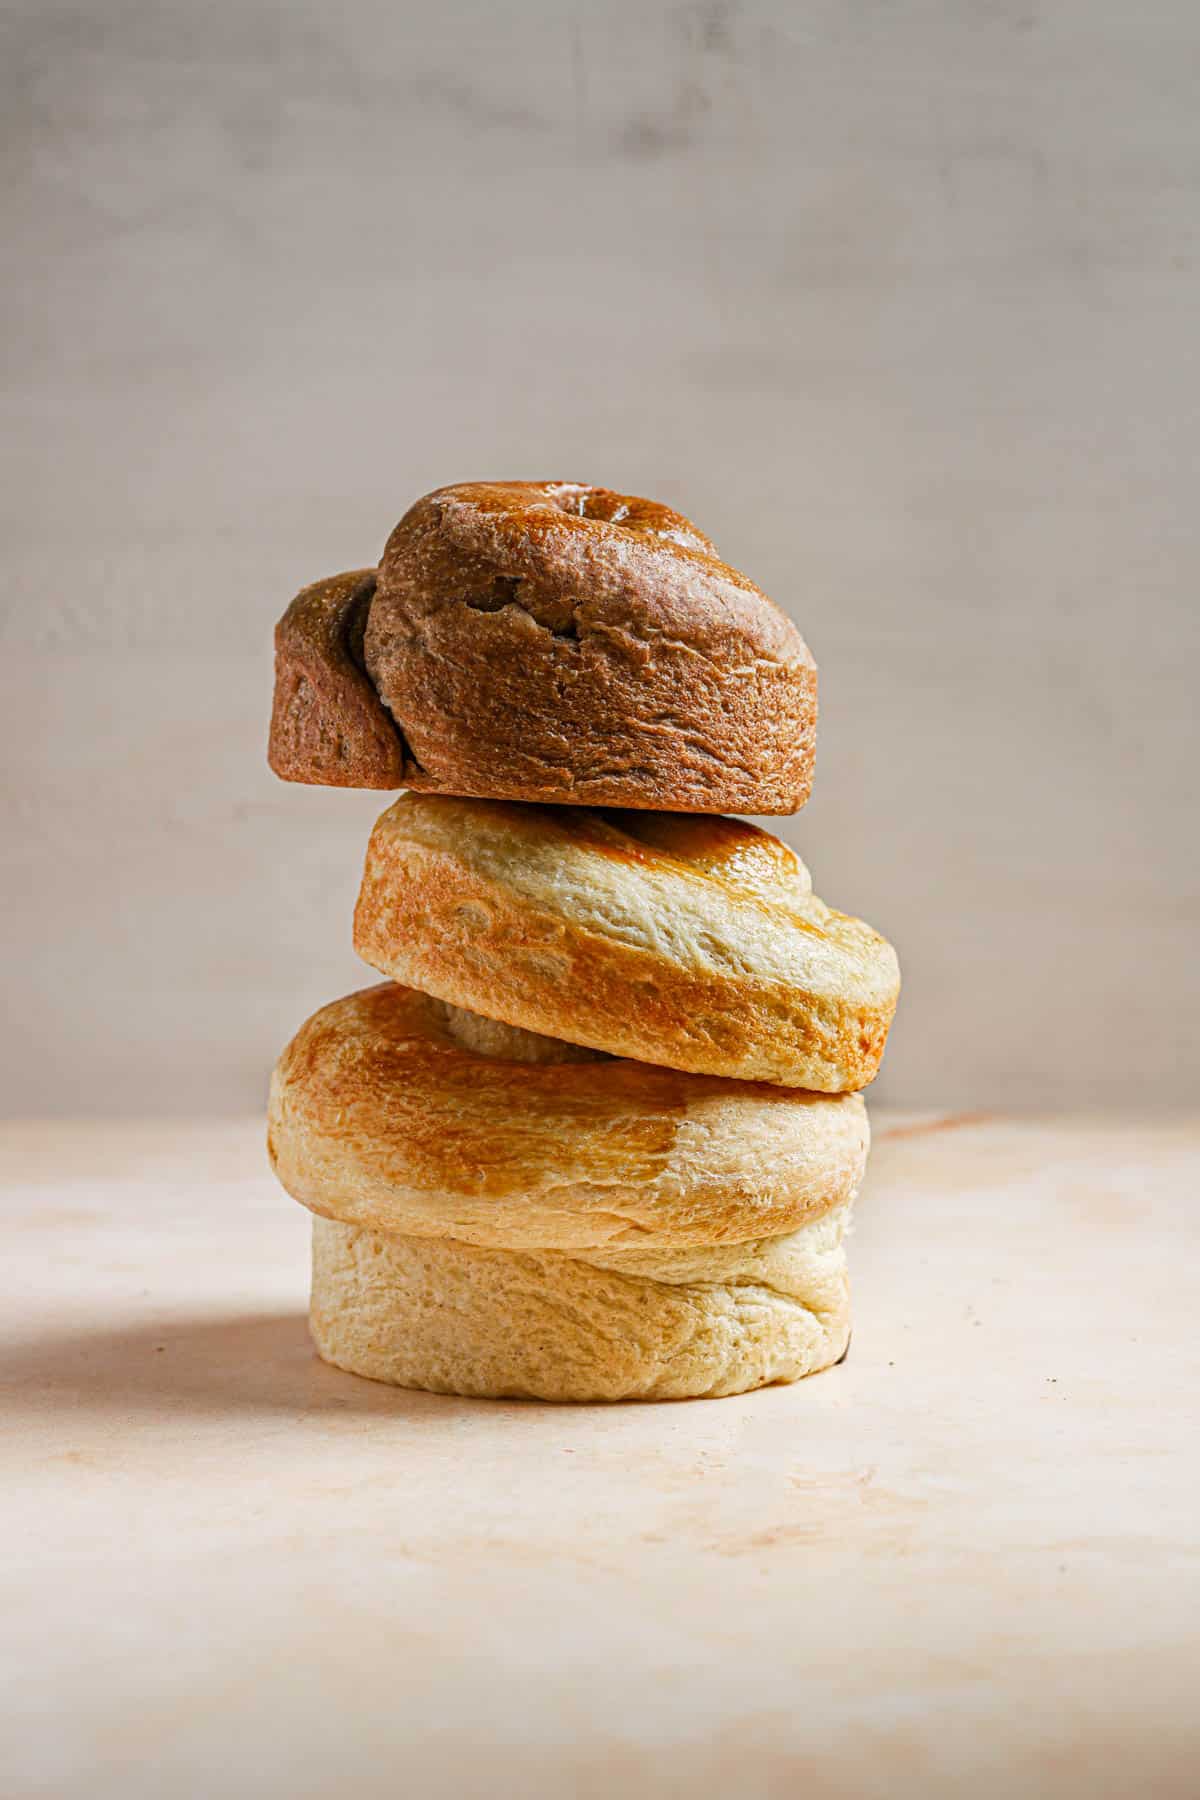 Three kinds of bread stacked on top of each other